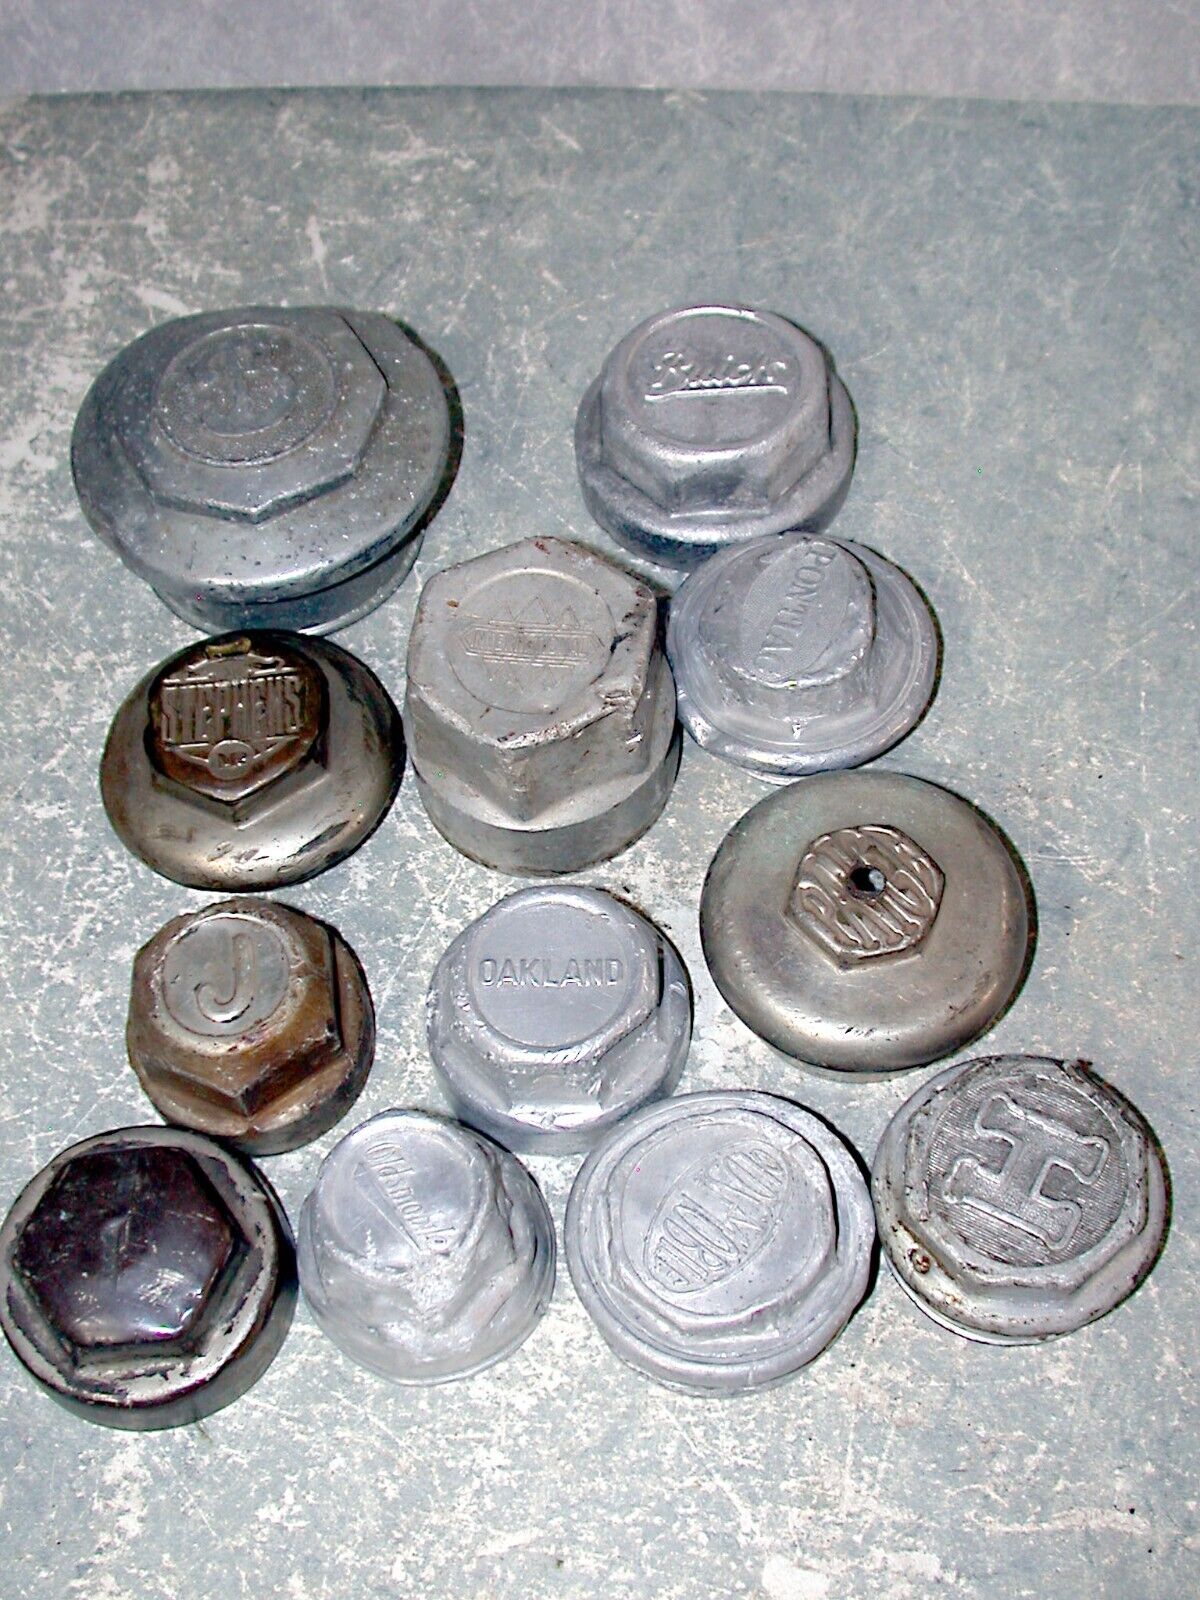 VINTAGE THREADED HUBCAPS DUSTCAPS, PAIGE, STEPHENS, JEWETT, OAKLAND & more